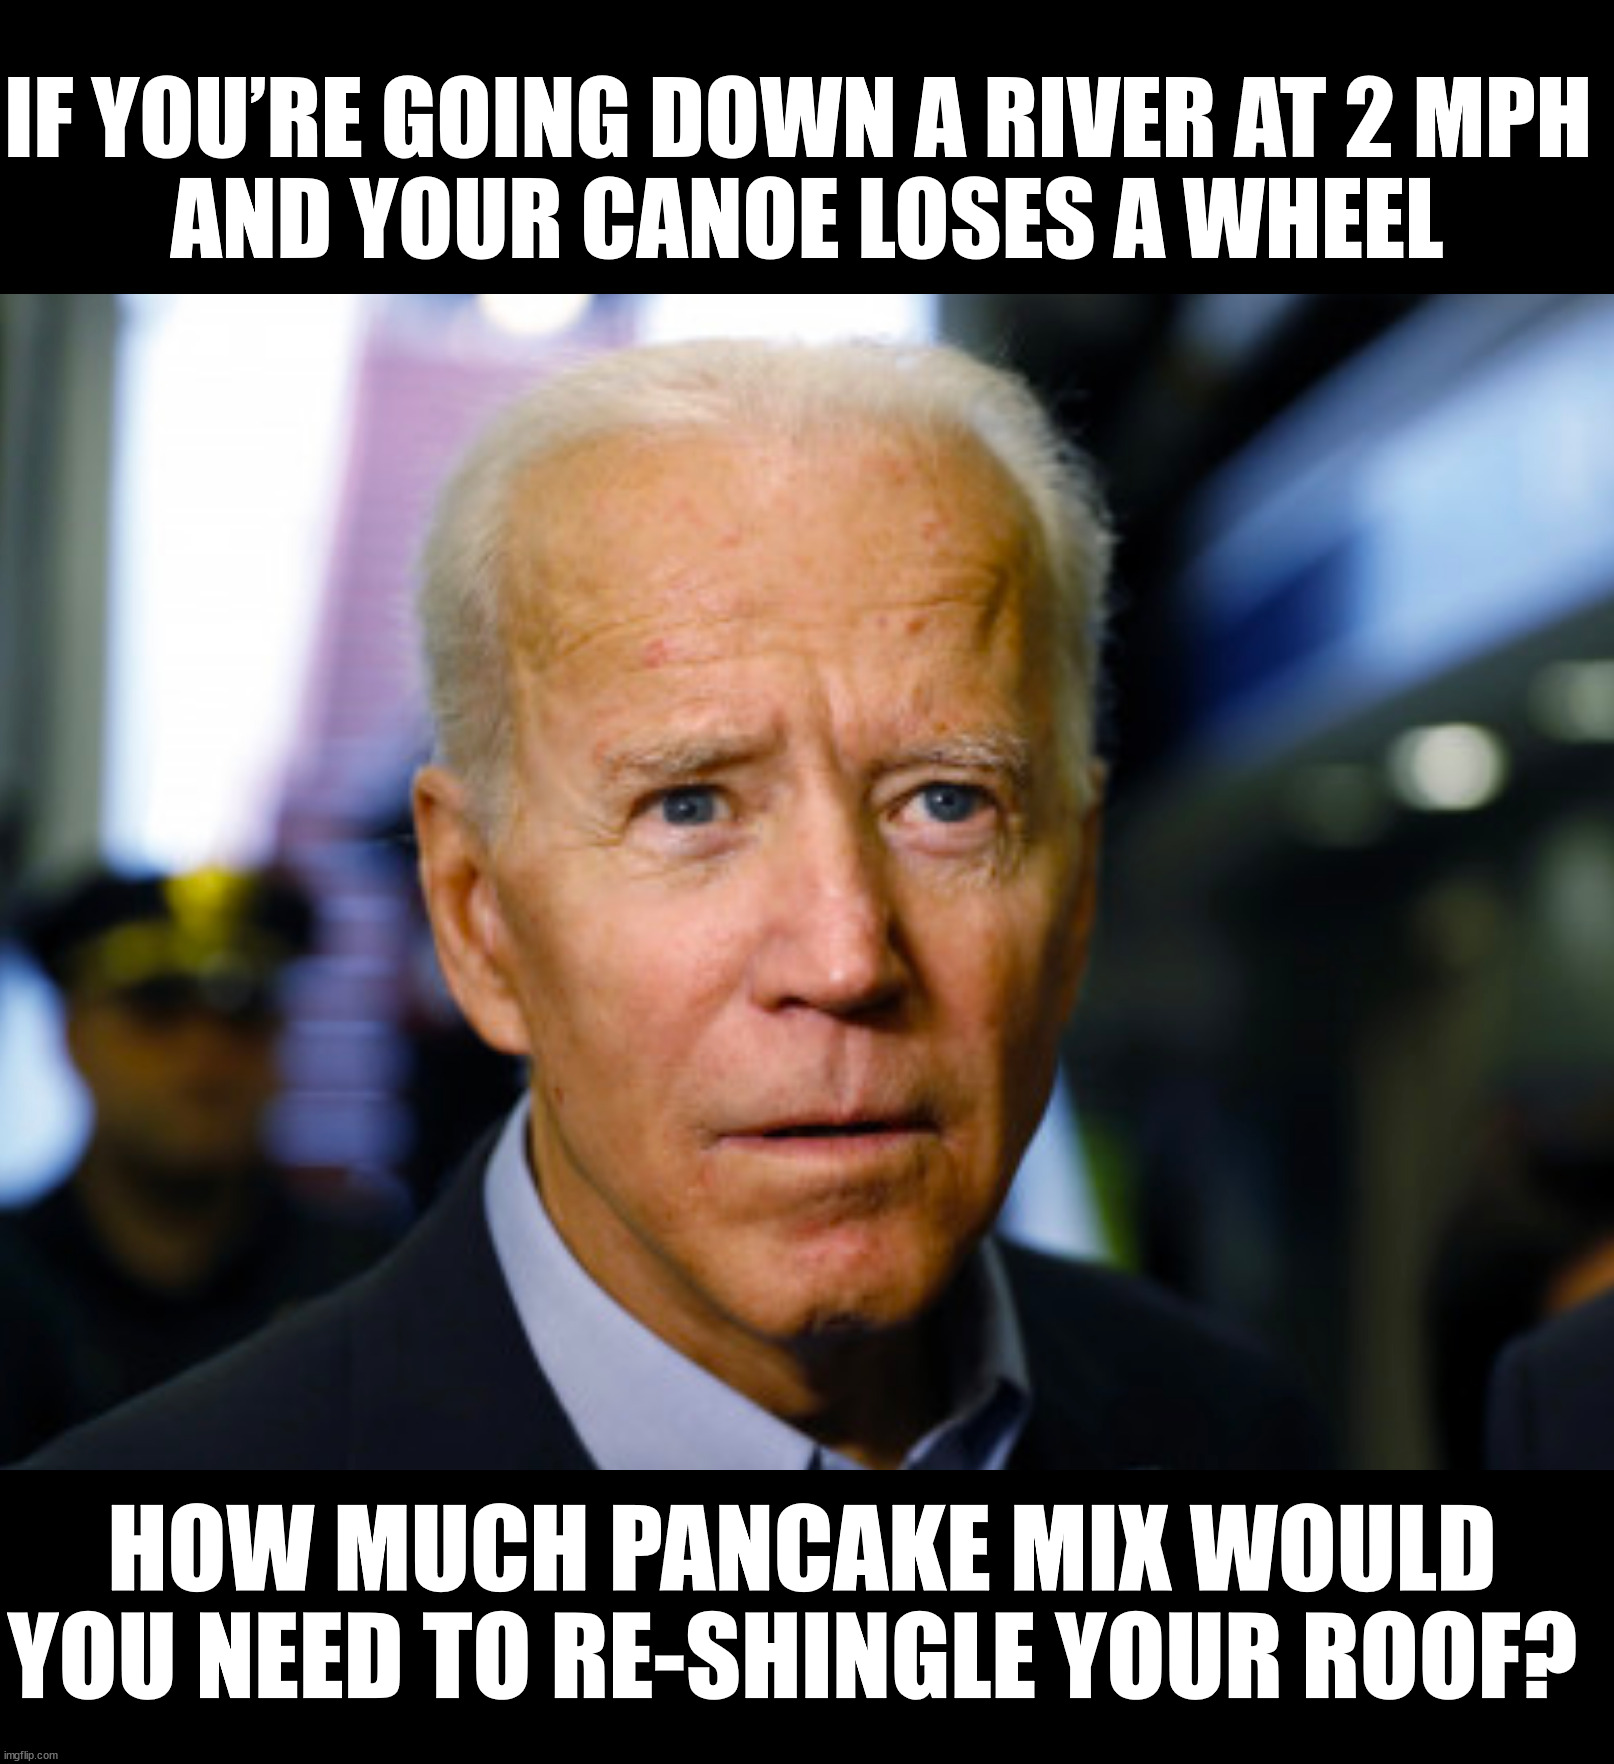 Joe Biden confused | IF YOU’RE GOING DOWN A RIVER AT 2 MPH 
AND YOUR CANOE LOSES A WHEEL; HOW MUCH PANCAKE MIX WOULD YOU NEED TO RE-SHINGLE YOUR ROOF? | image tagged in joe biden confused | made w/ Imgflip meme maker